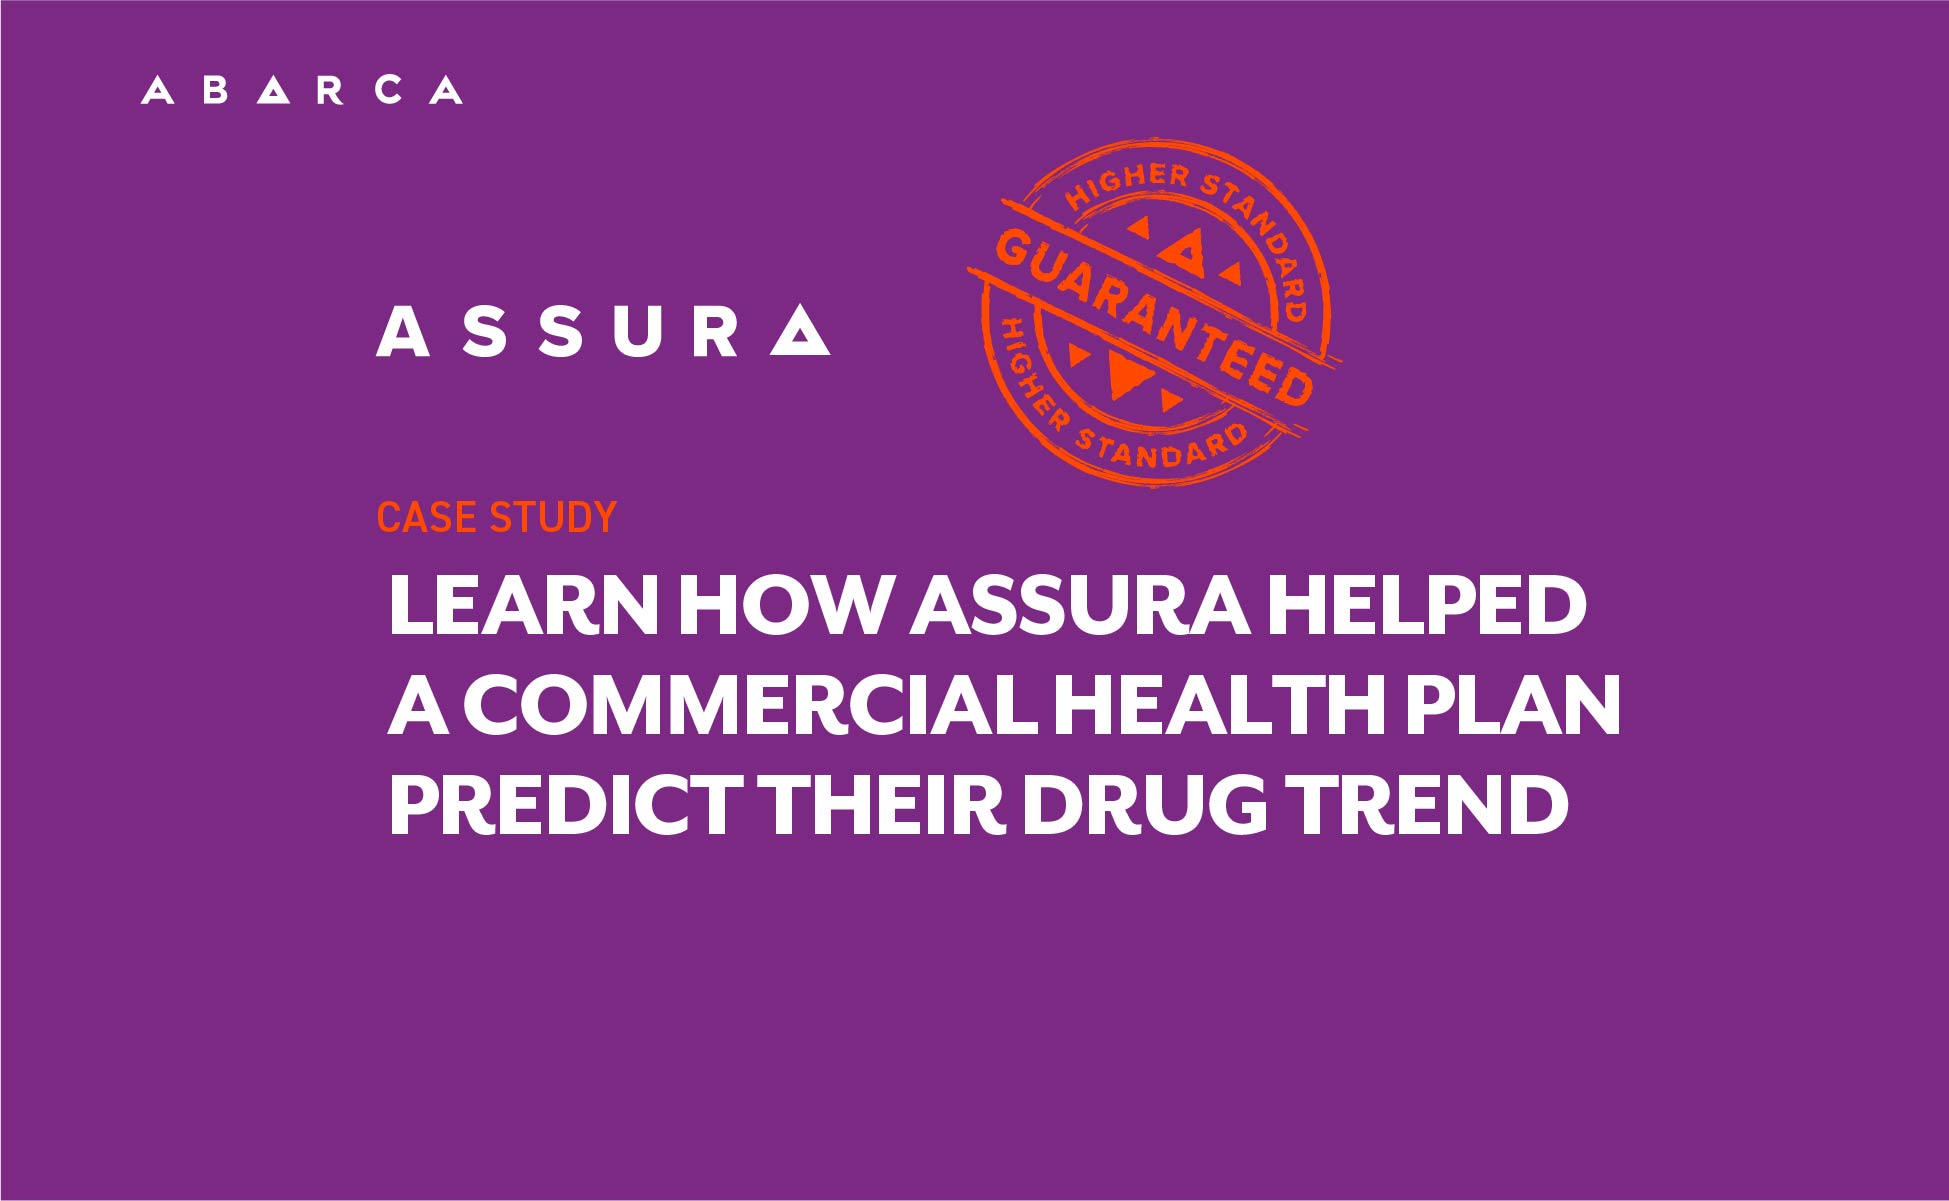 Abarca Health: Learn how Assura helped a commercial health plan predict their drug trend